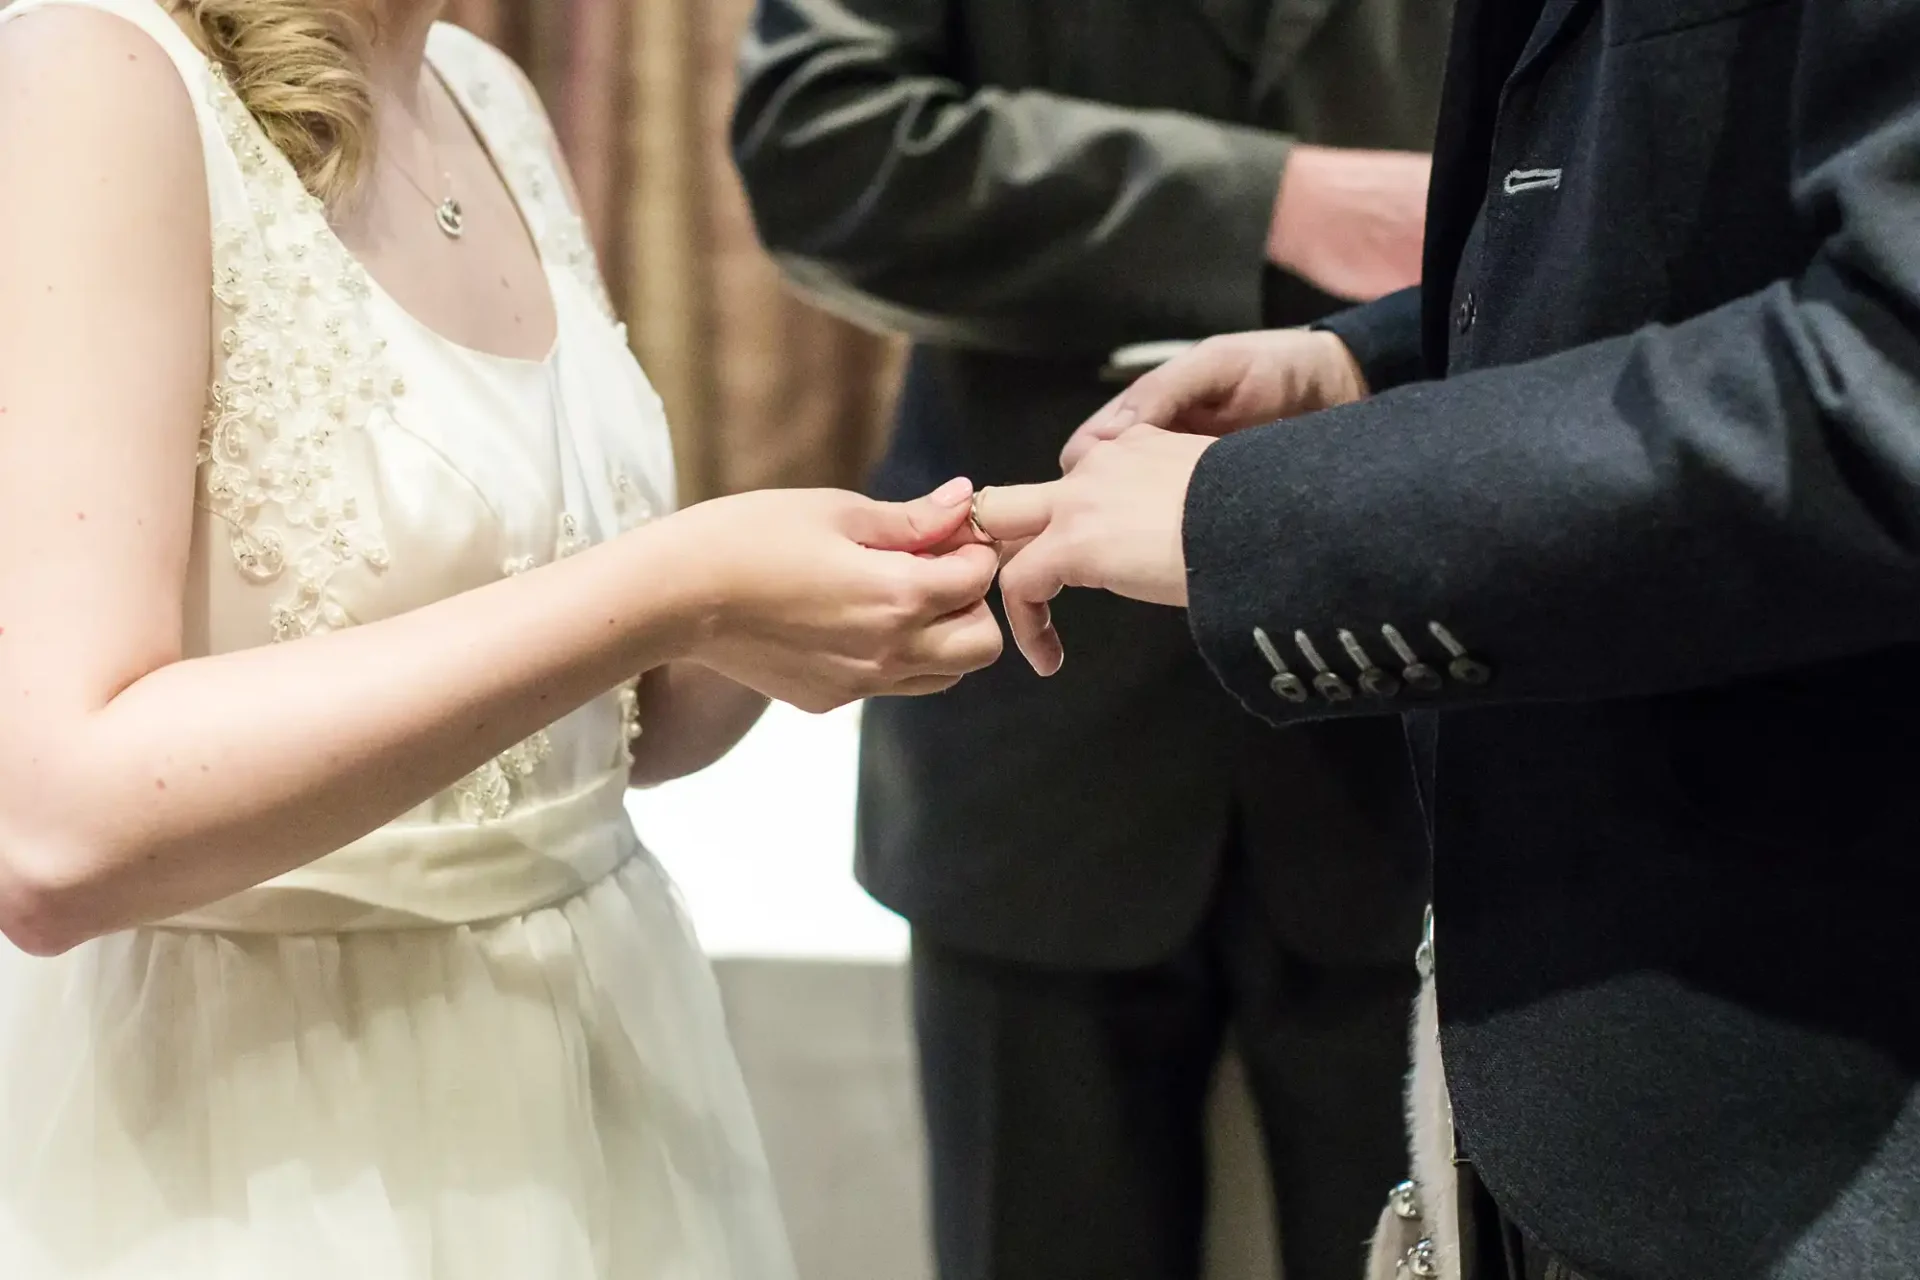 A bride placing a wedding ring on the groom's finger during a ceremony, with focus on their hands.